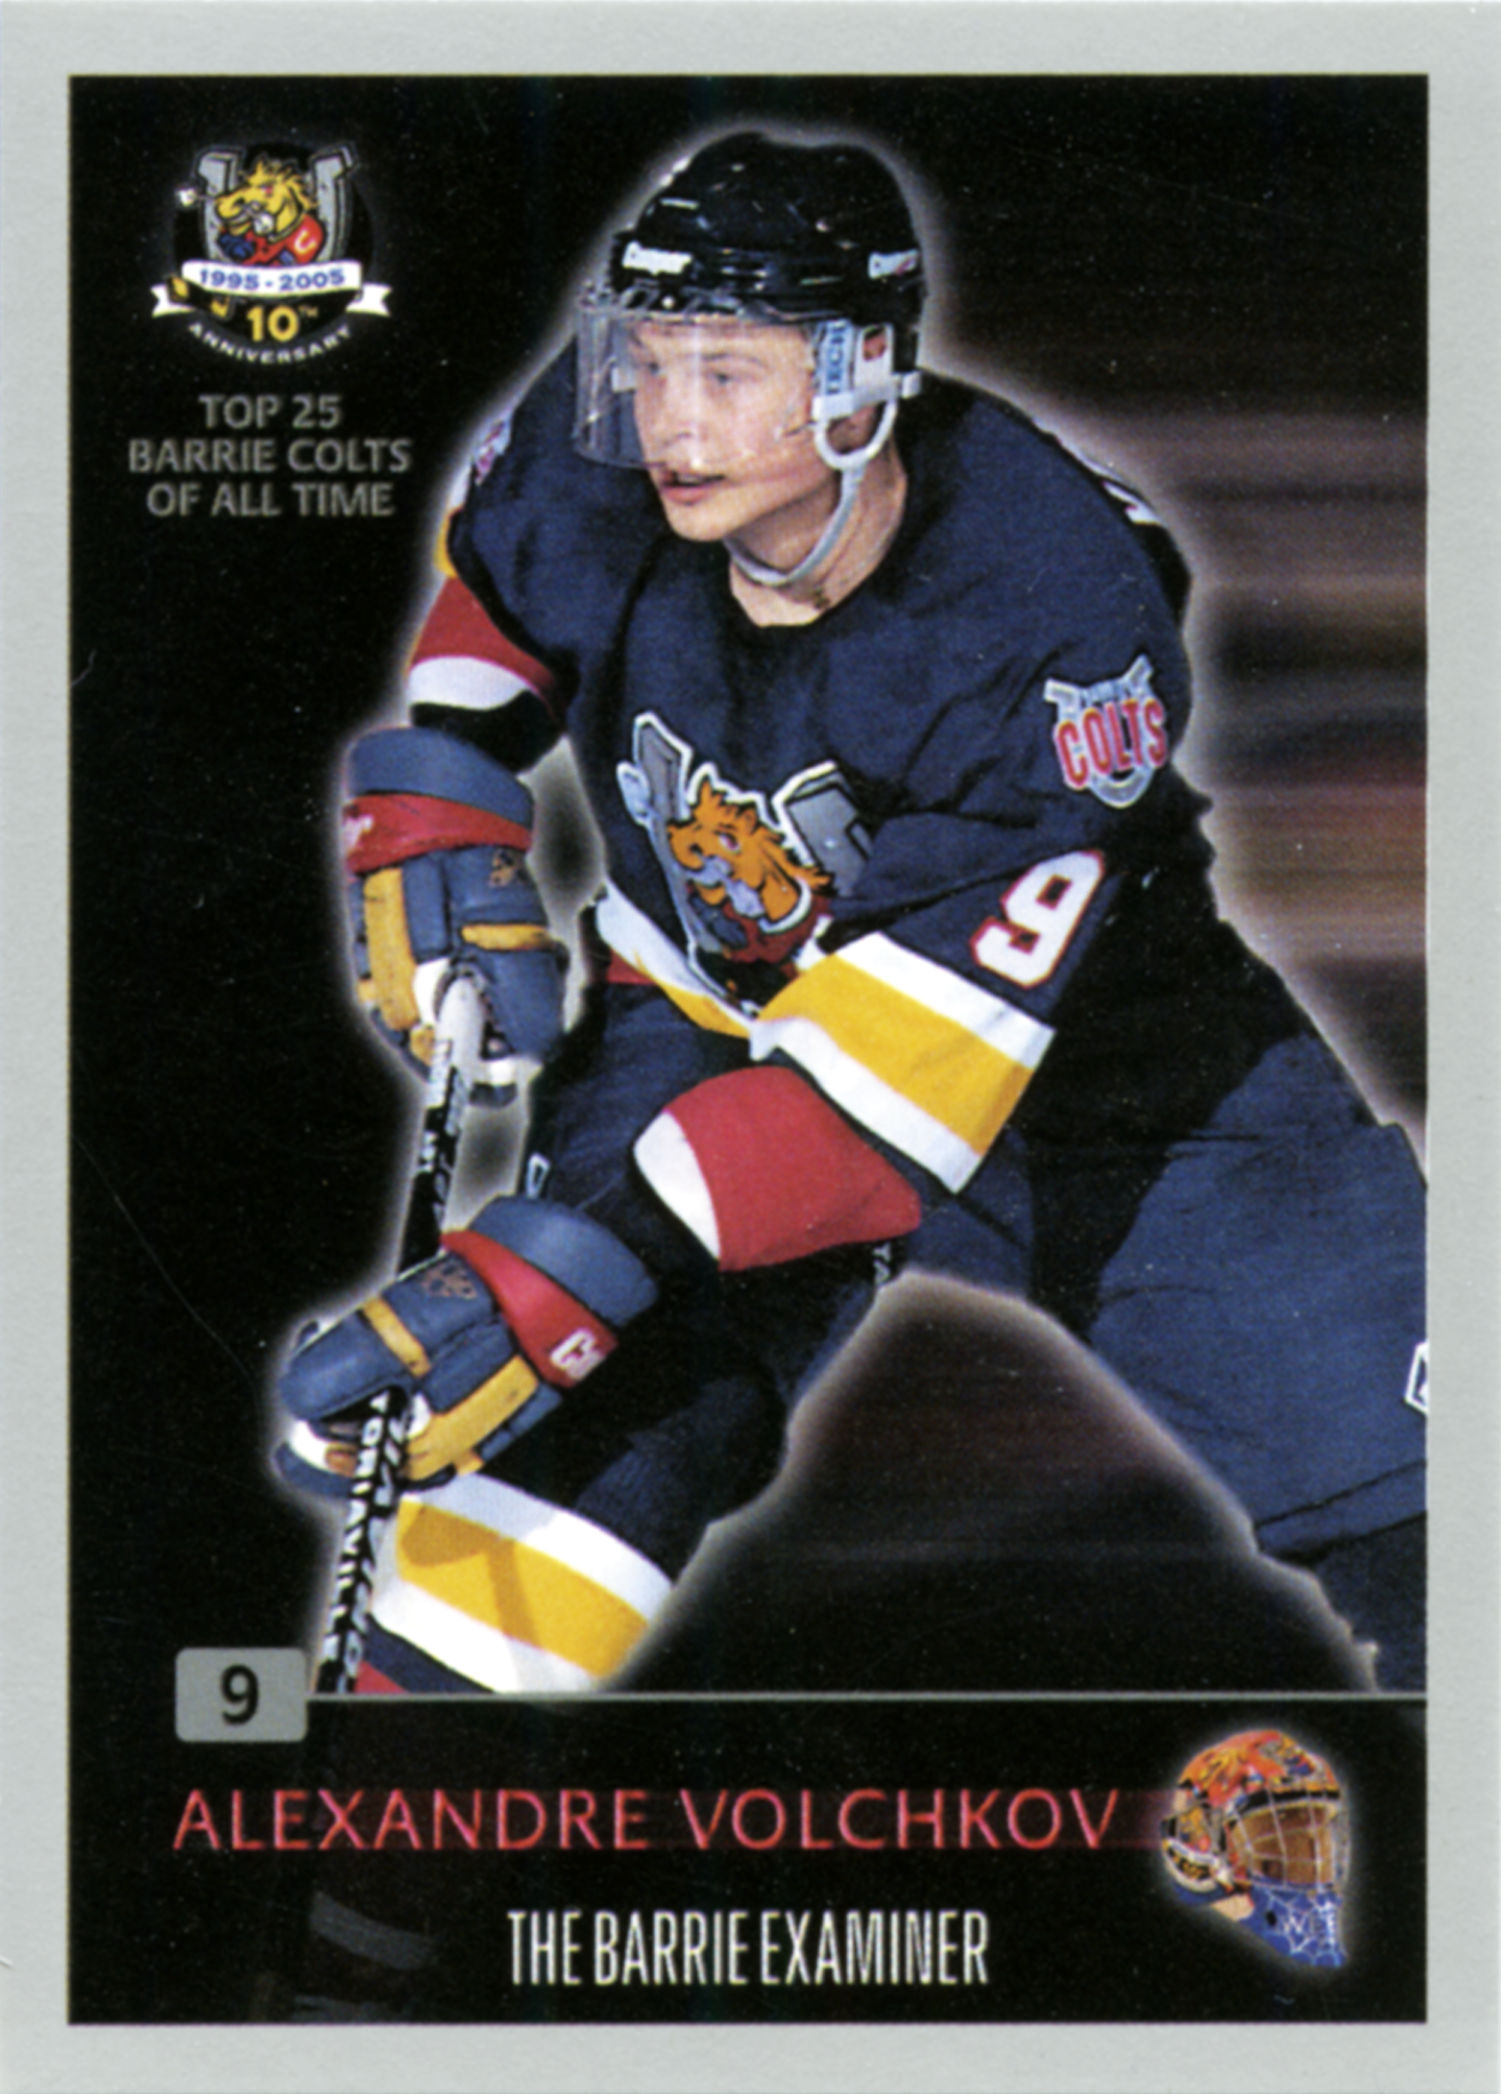 Barrie Colts 2007-08 hockey card image